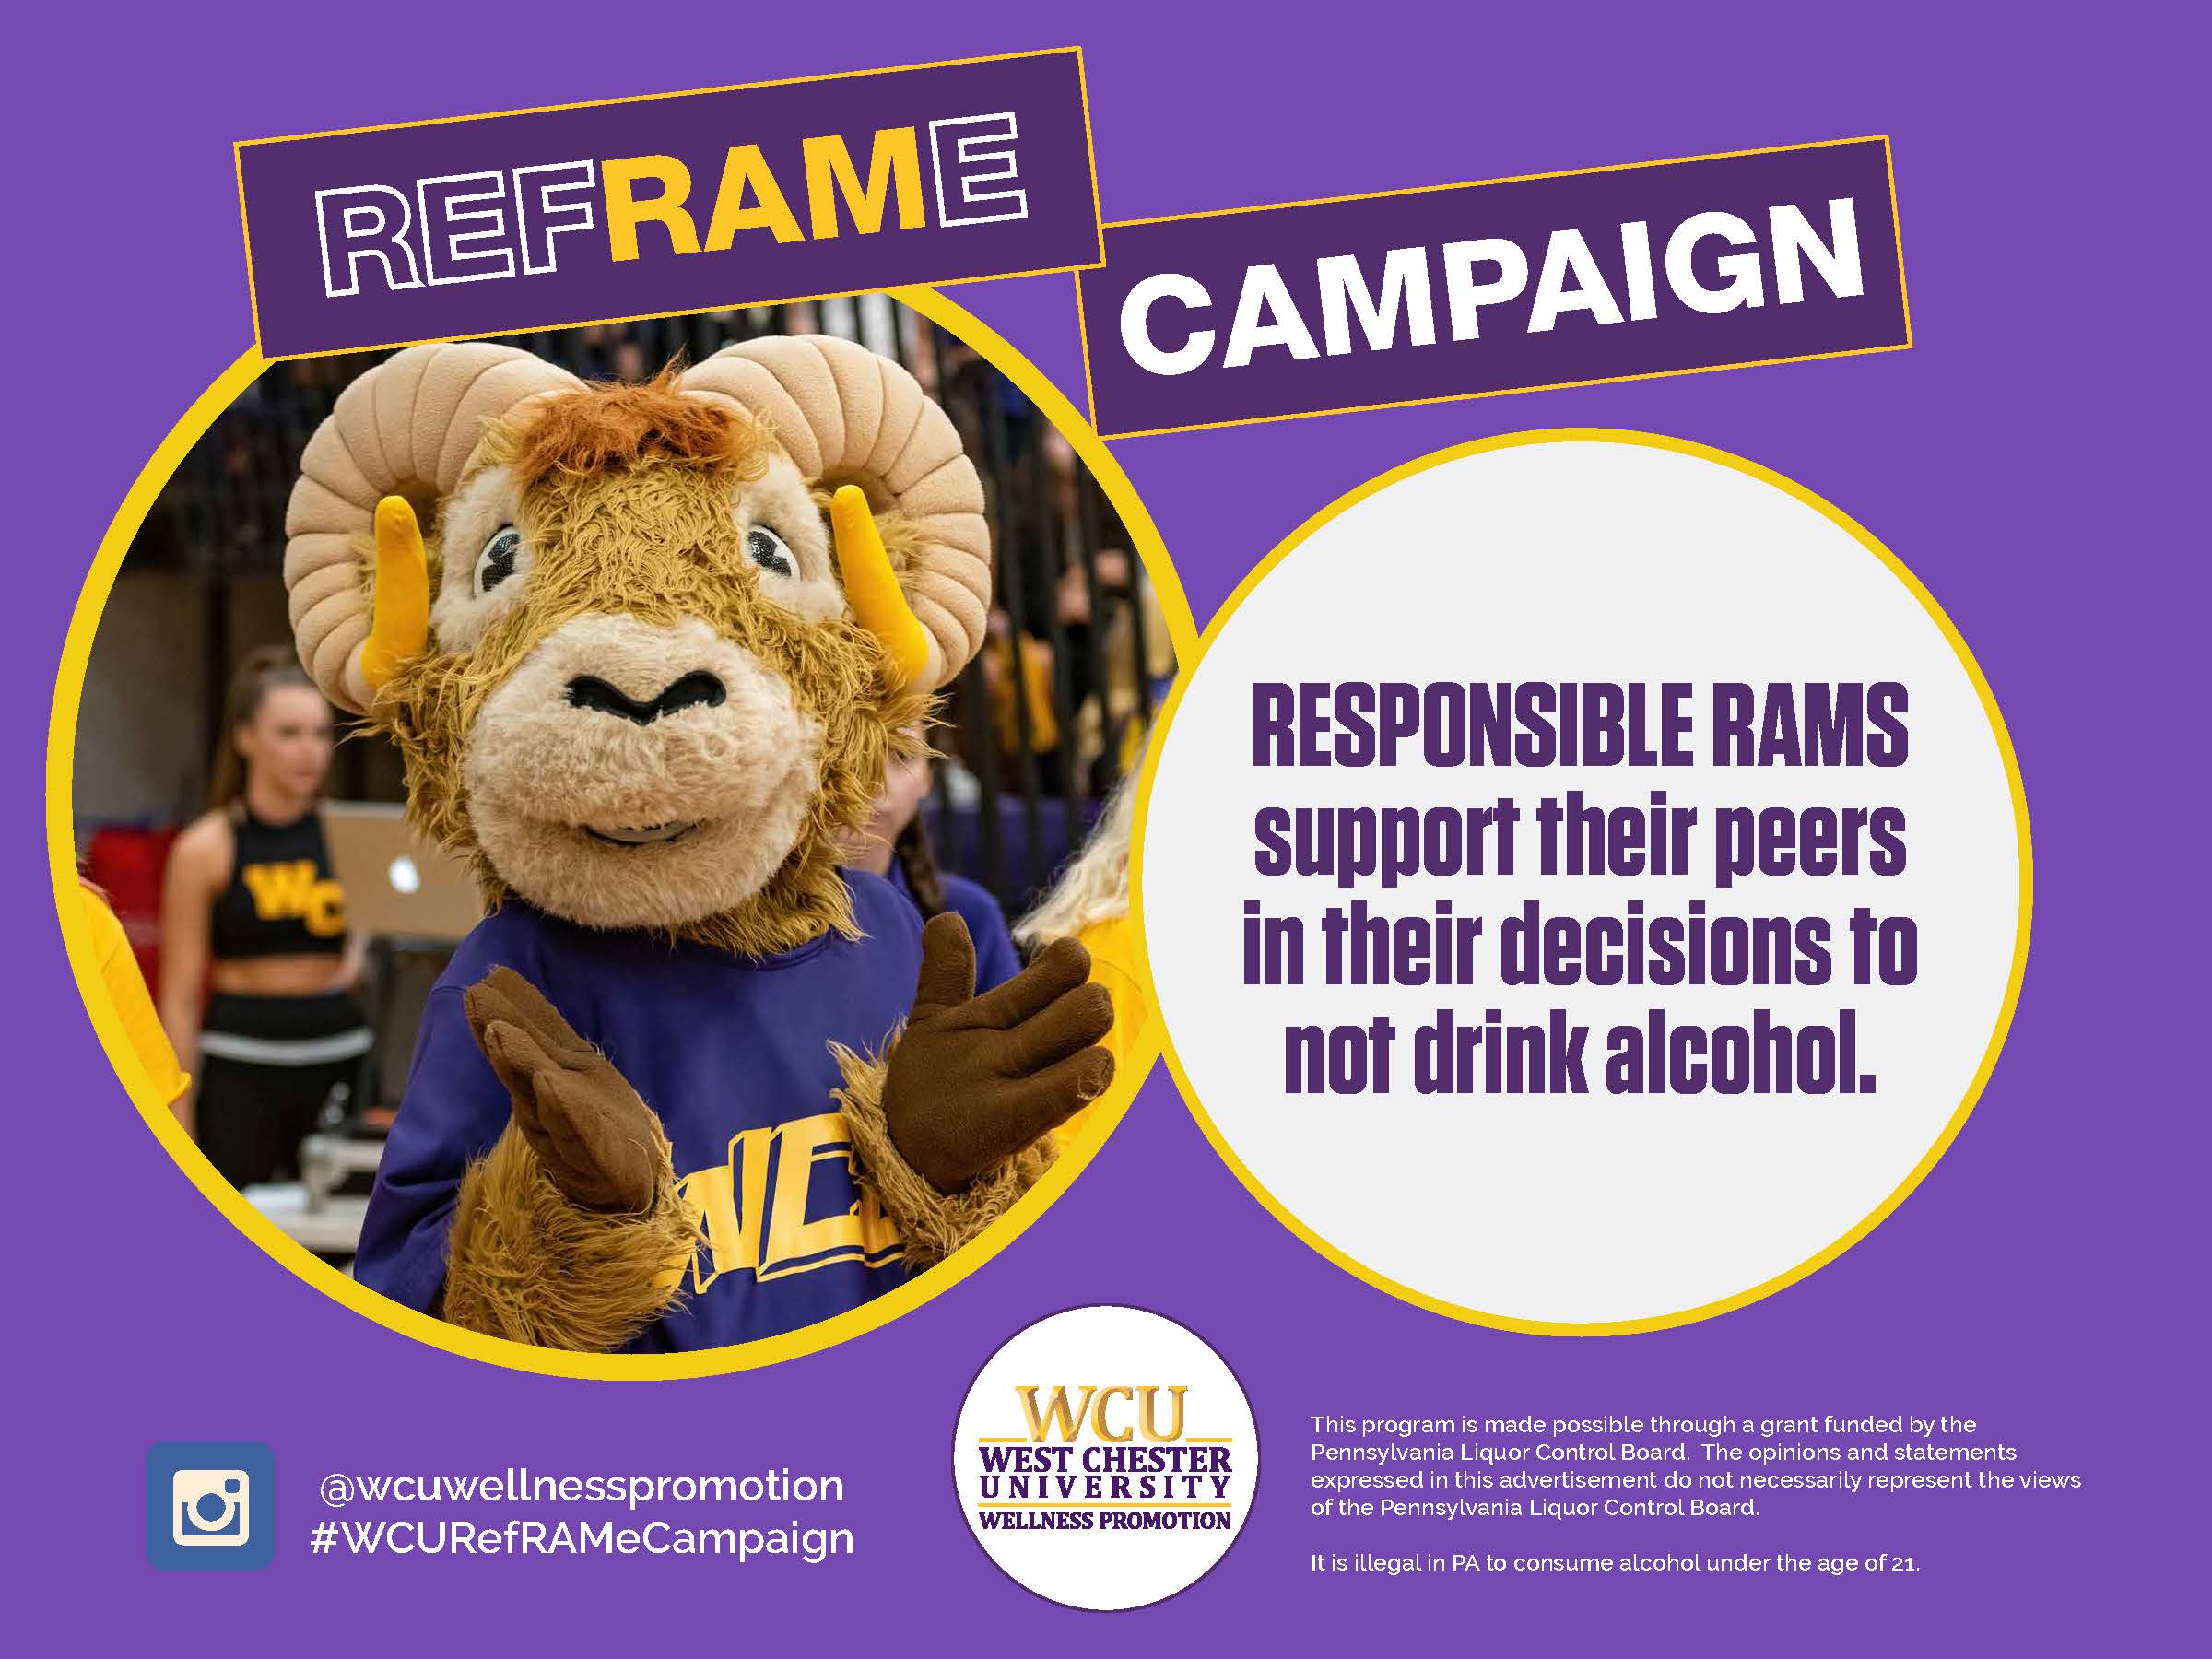 Responsible Rams support their peers in their decisions to not drink alcohol.